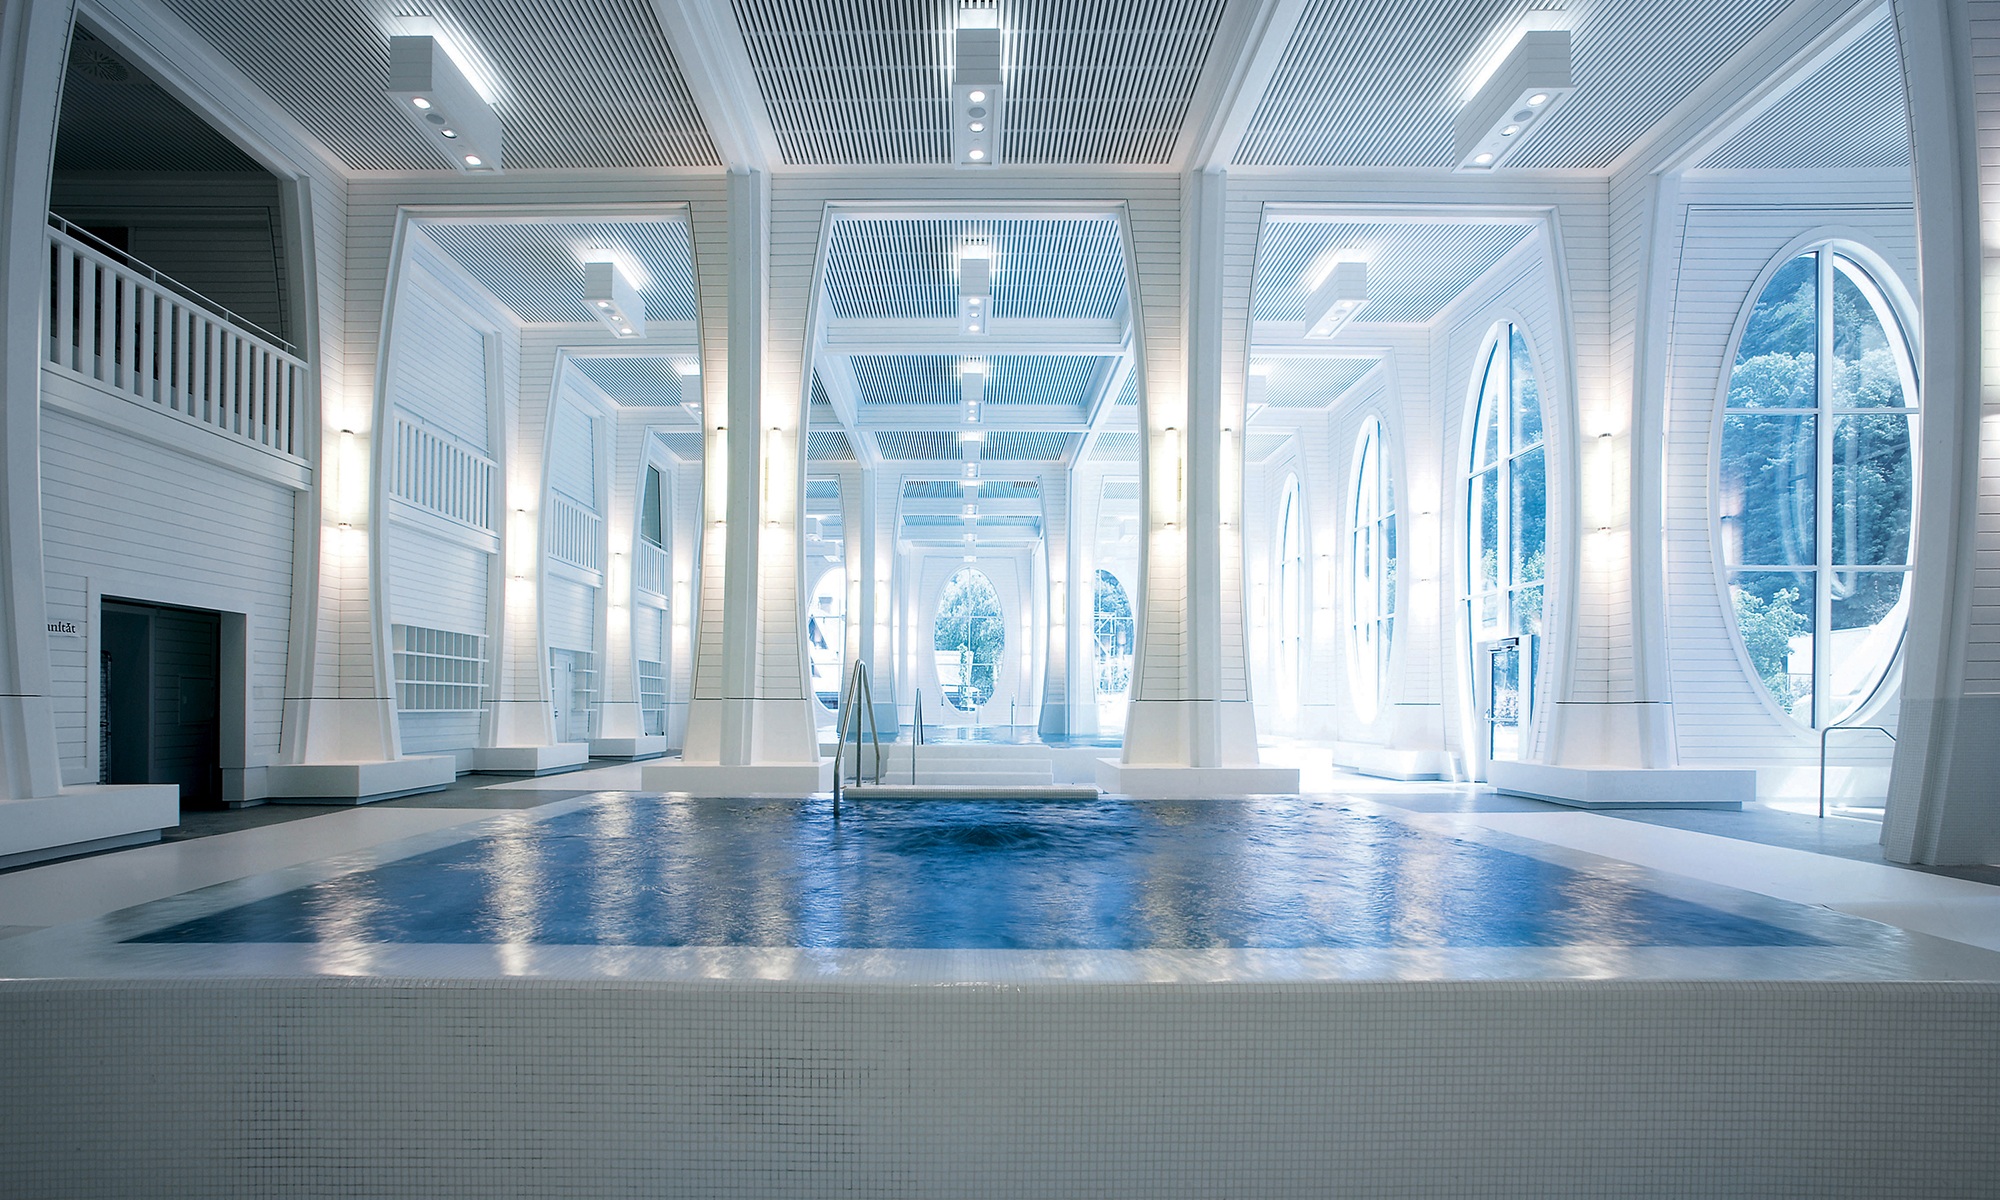 Swimming pool in a room with white columns and wooden ceiling cladding